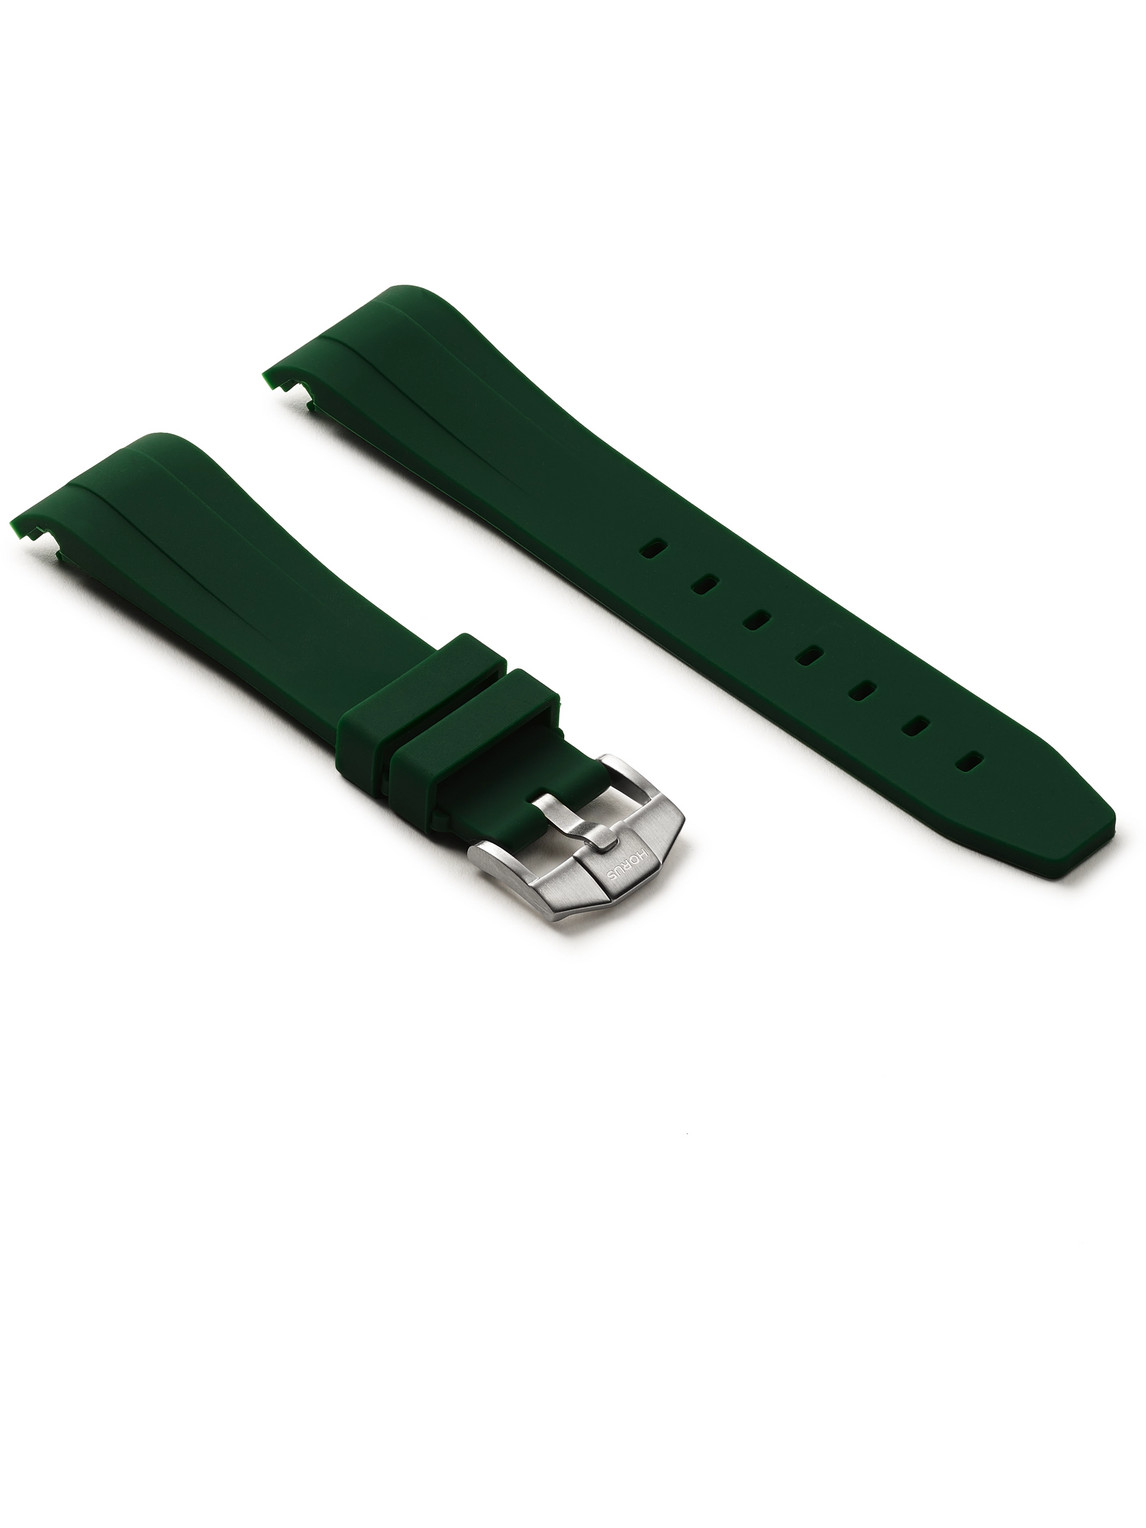 Horus Watch Straps 21mm Rubber Integrated Watch Strap In Green